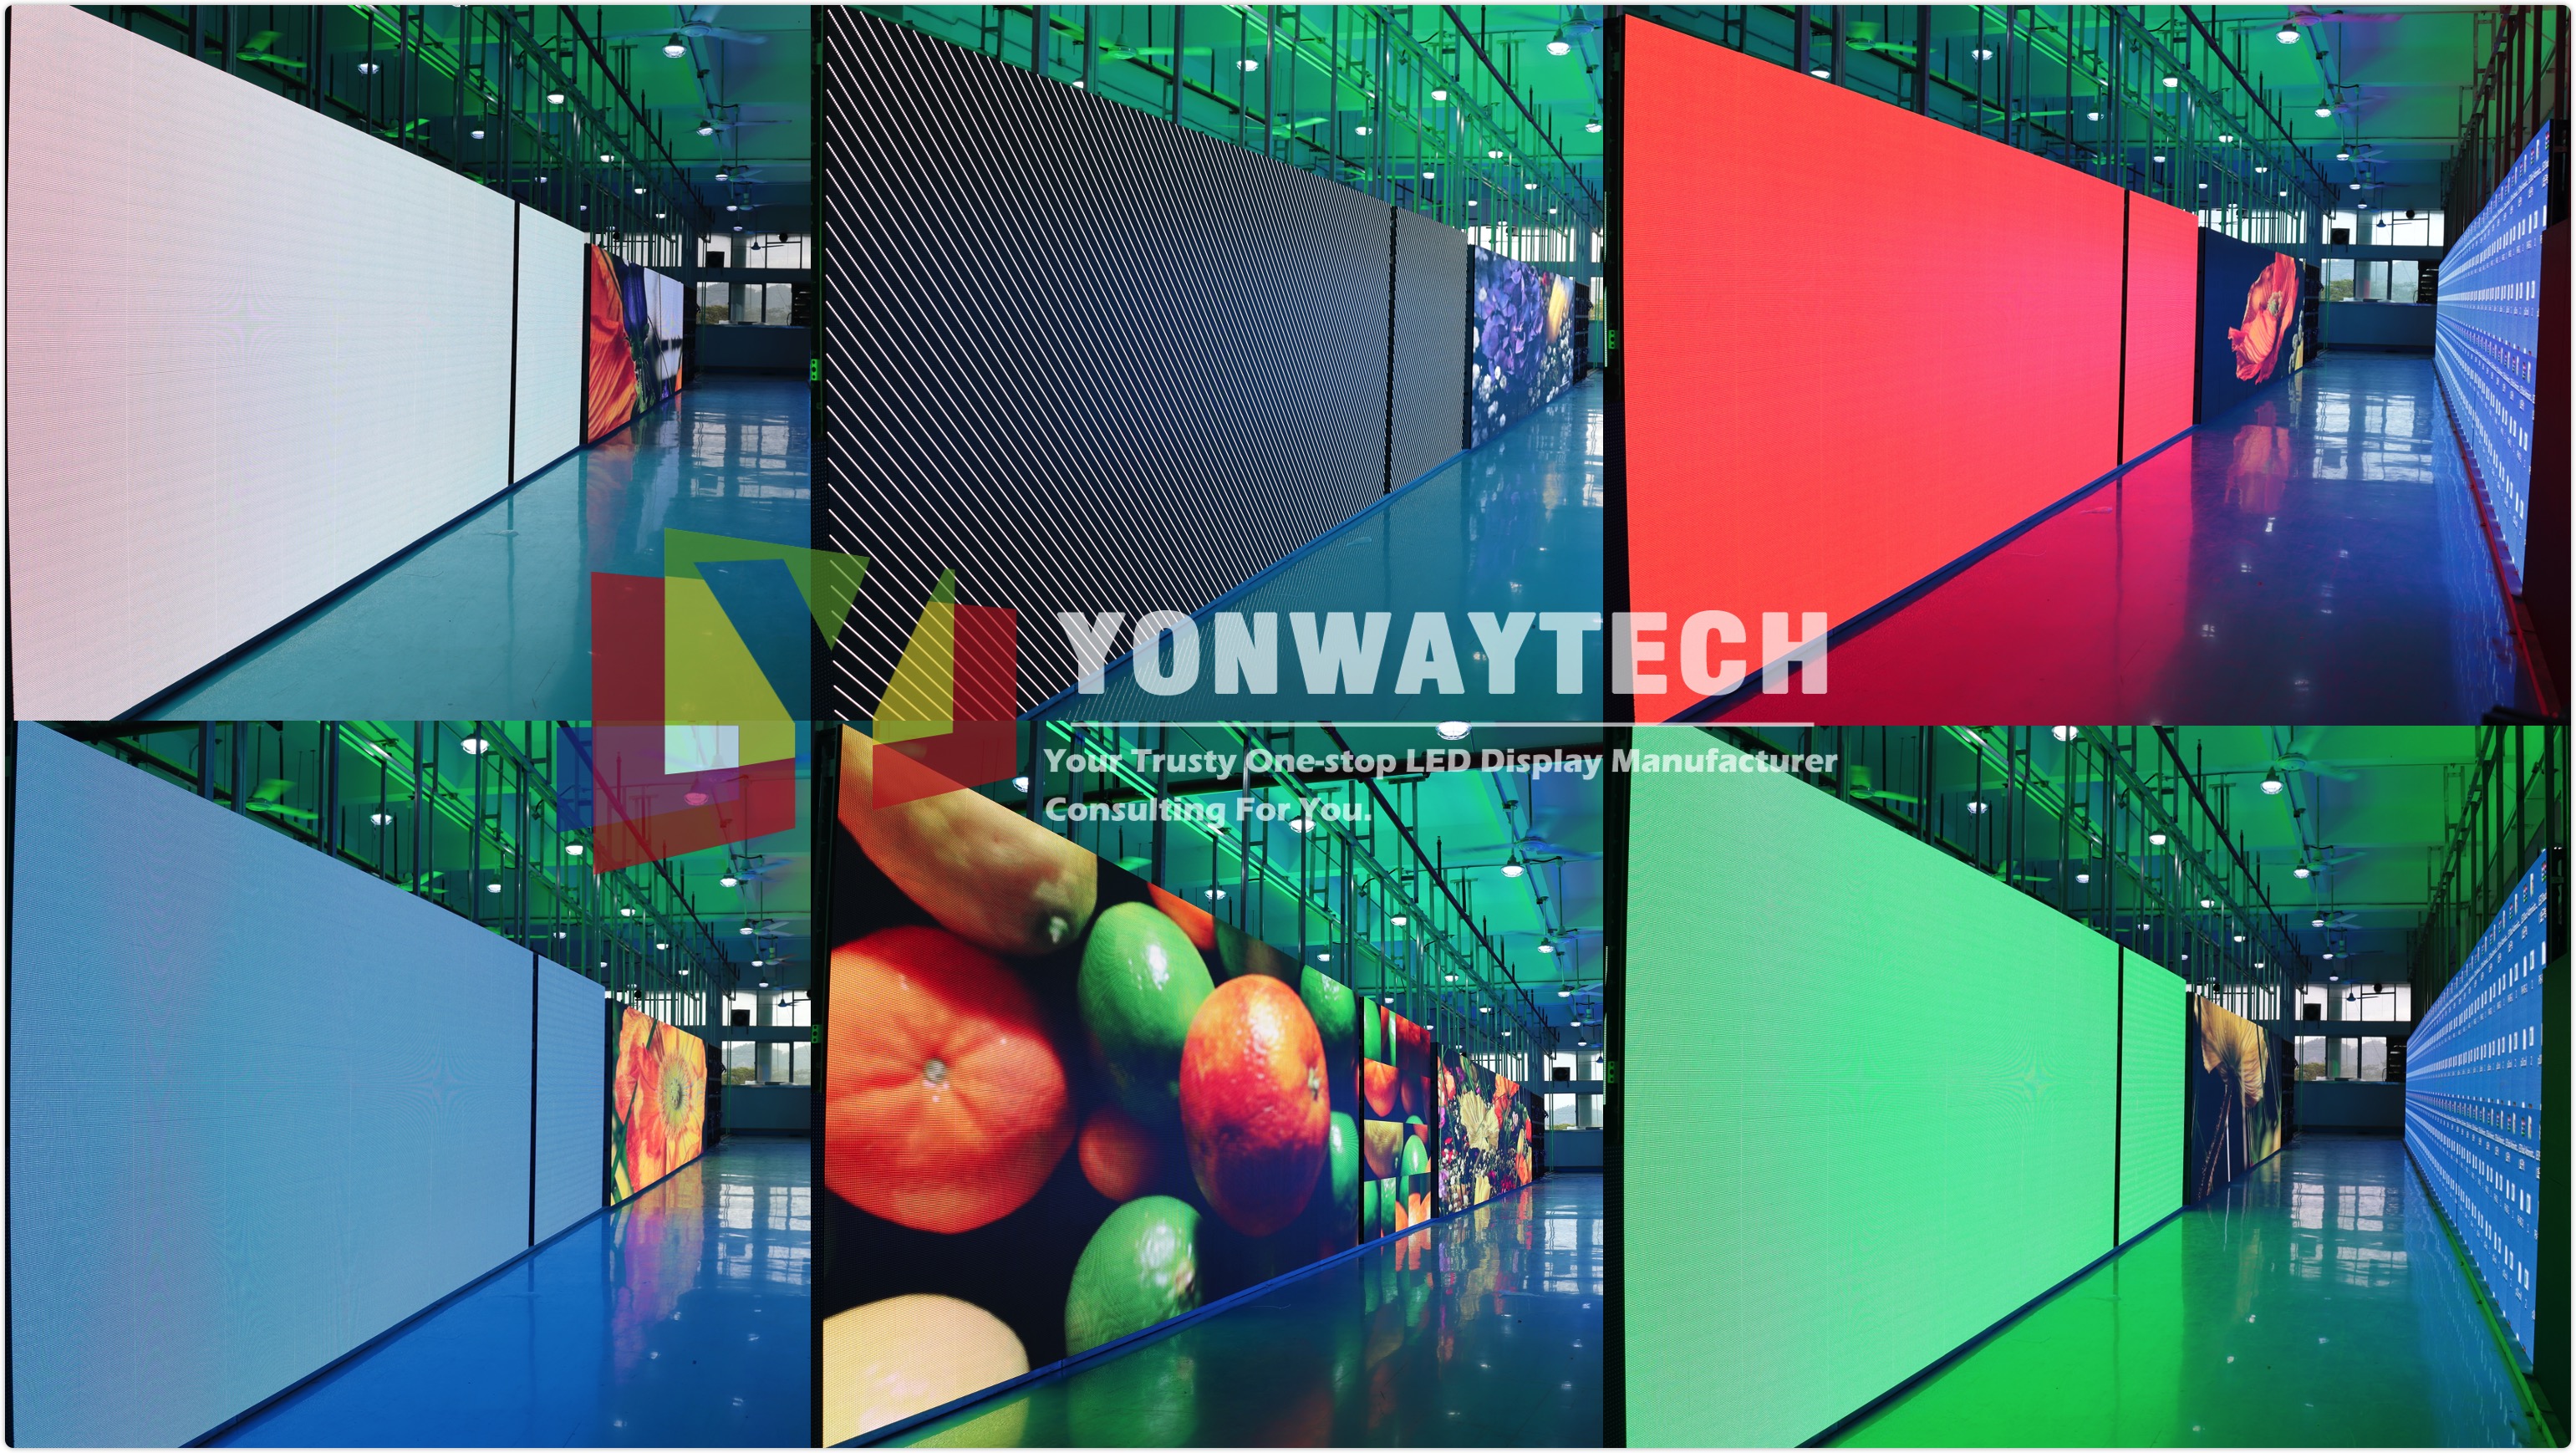 20 sqm of3.91 high end configuration led display ready to delivery to our EU client.